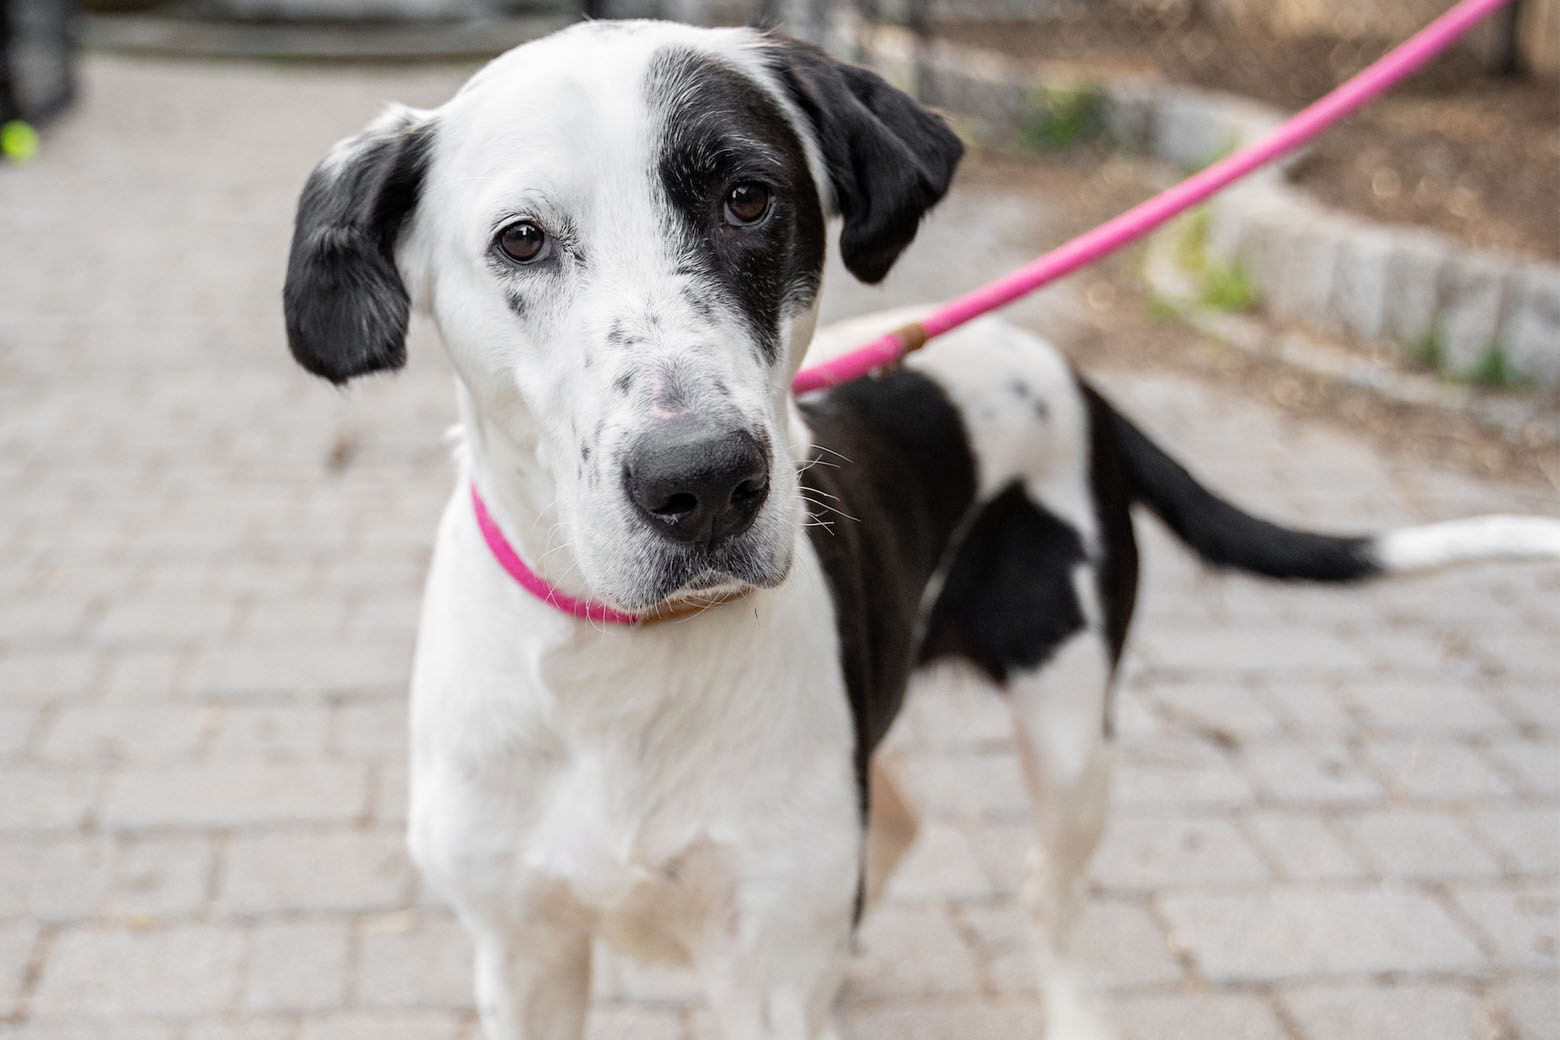 <p>Meet Penelope! She will quickly wiggle her way into your heart with her gentle nudges when she wants attention. At seven years old, Penelope is well past her puppy days but enjoys getting outside for walks and exploring.</p>
<p>Penelope loves people and will greet you with a full body wiggle and tail wag. She&#8217;s a smart girl and is very motivated to do tricks for treats.</p>
<p>To learn more about this darling girl, visit <a href="https://www.humanerescuealliance.org/adopt" target="_blank" rel="noopener">humanerescuealliance.org/adopt</a>.</p>
